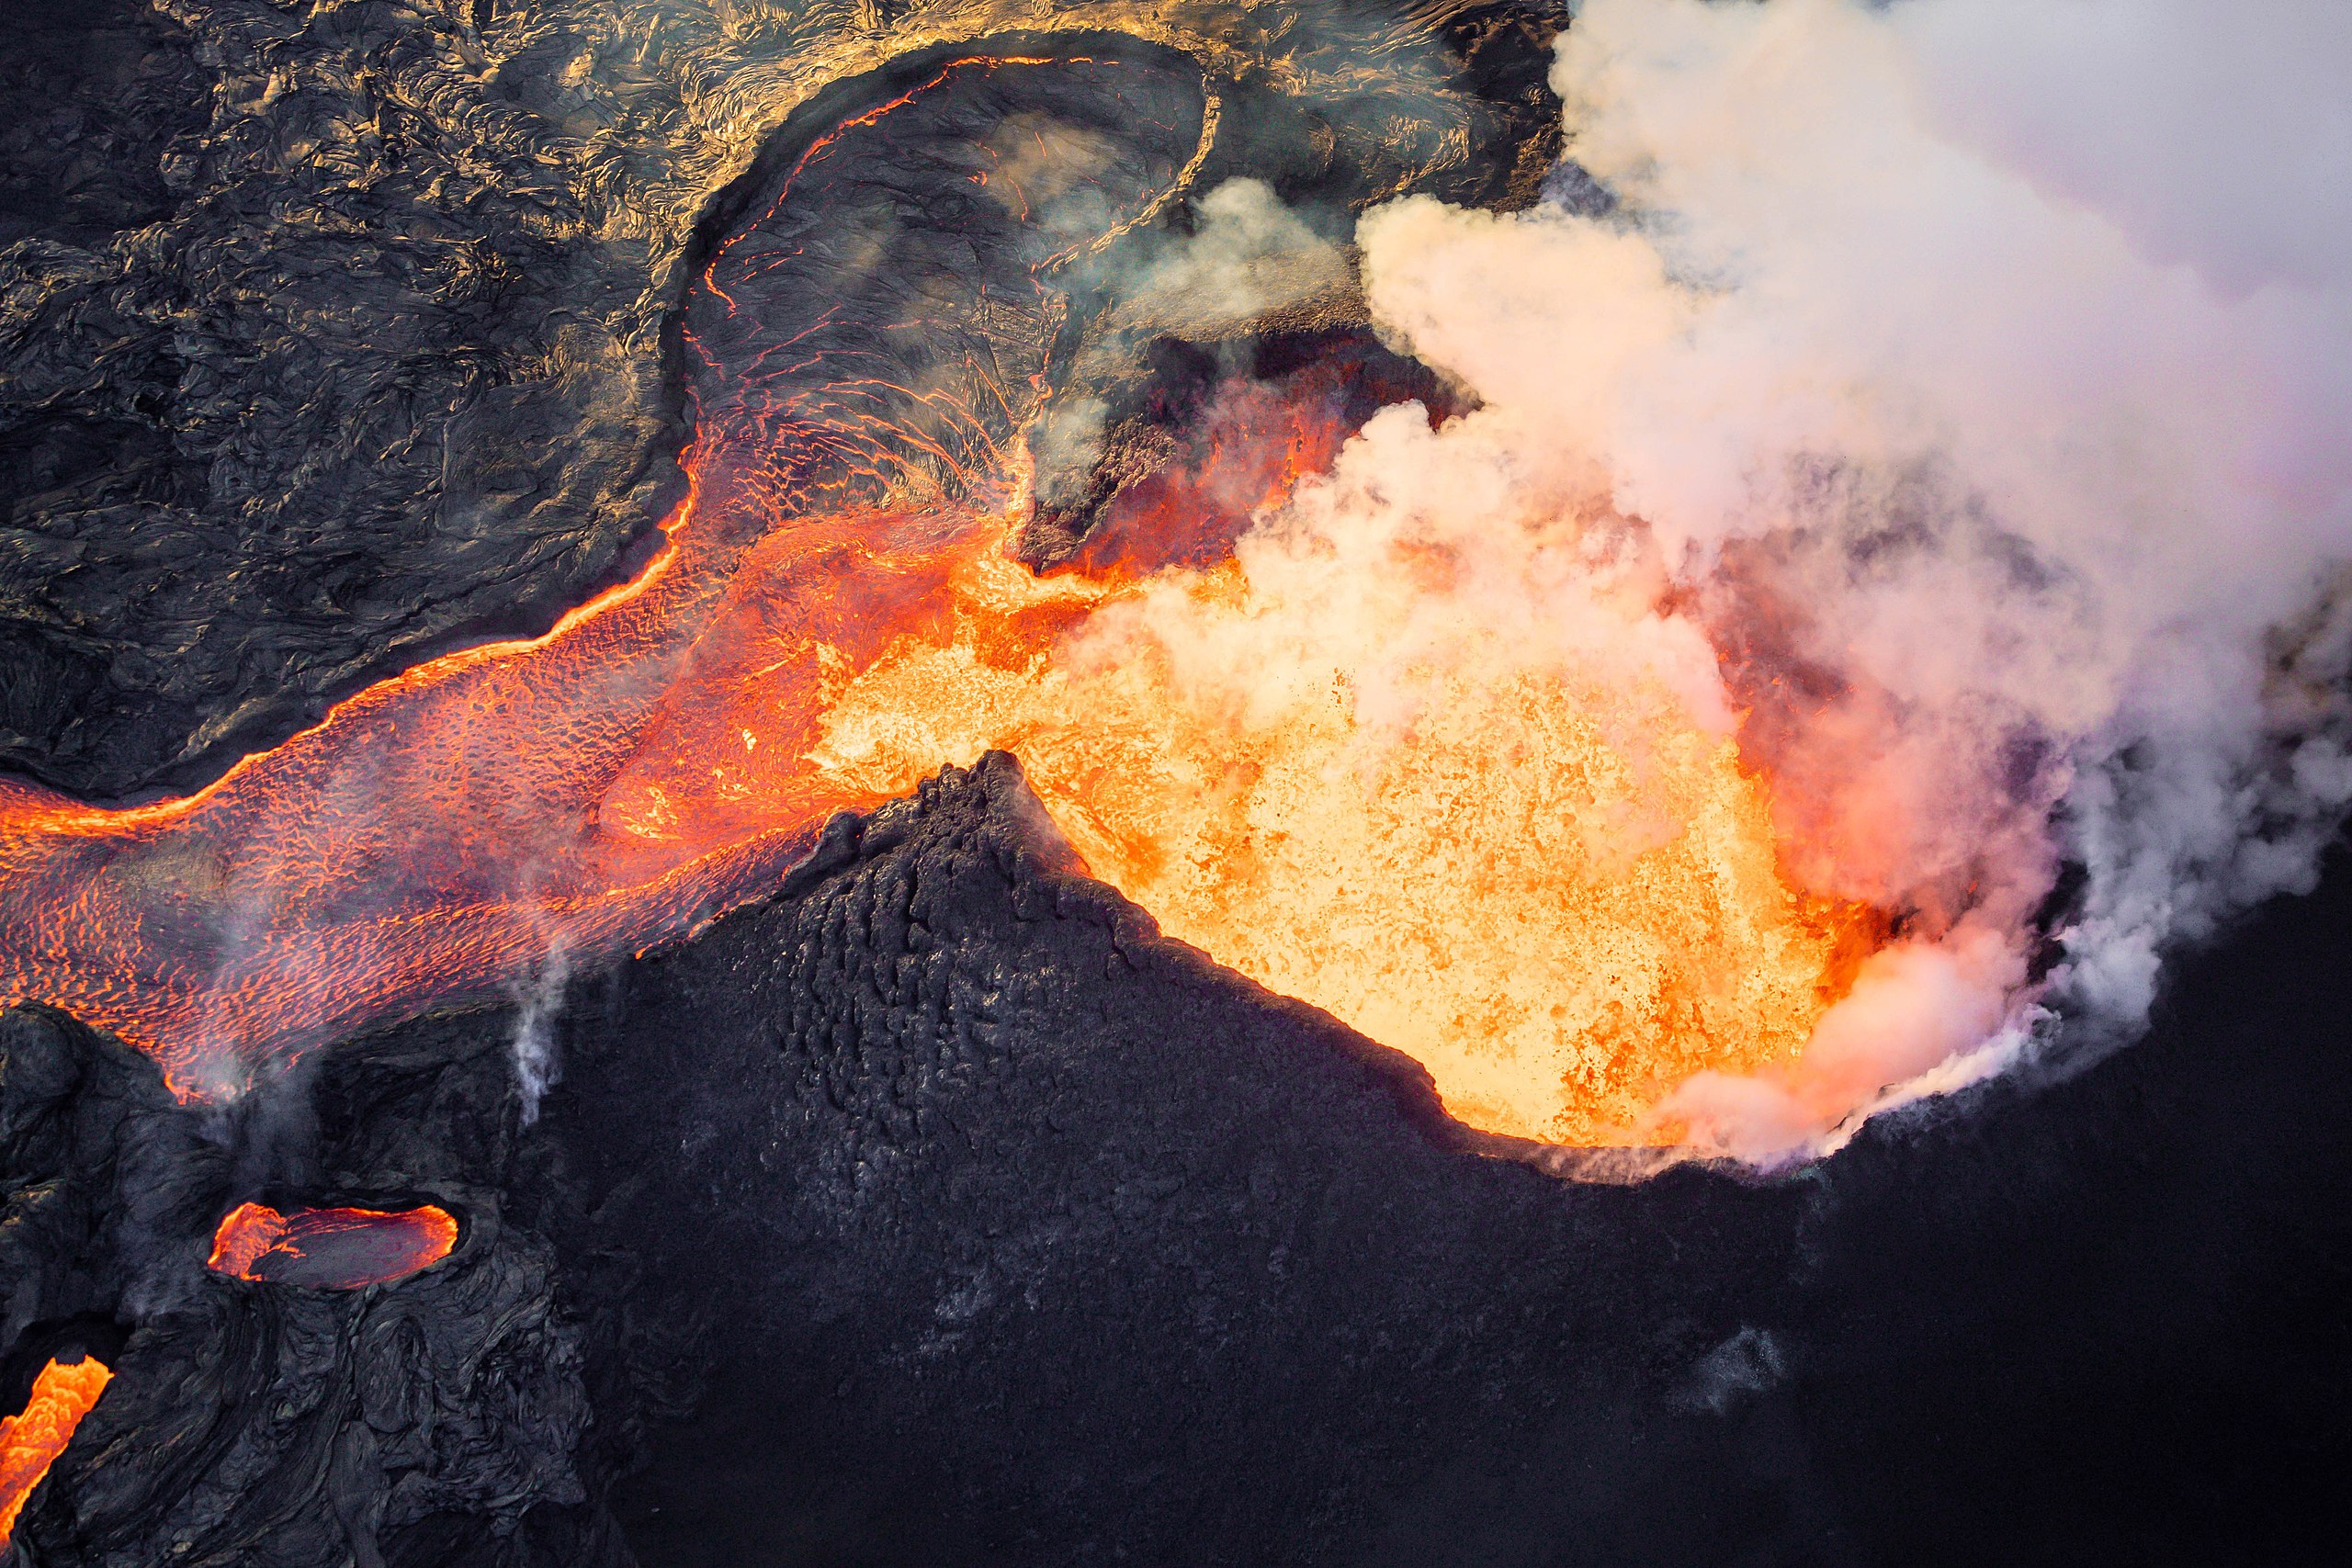 An aerial view of a lava flow showcasing the power of nature from a cosmic perspective.